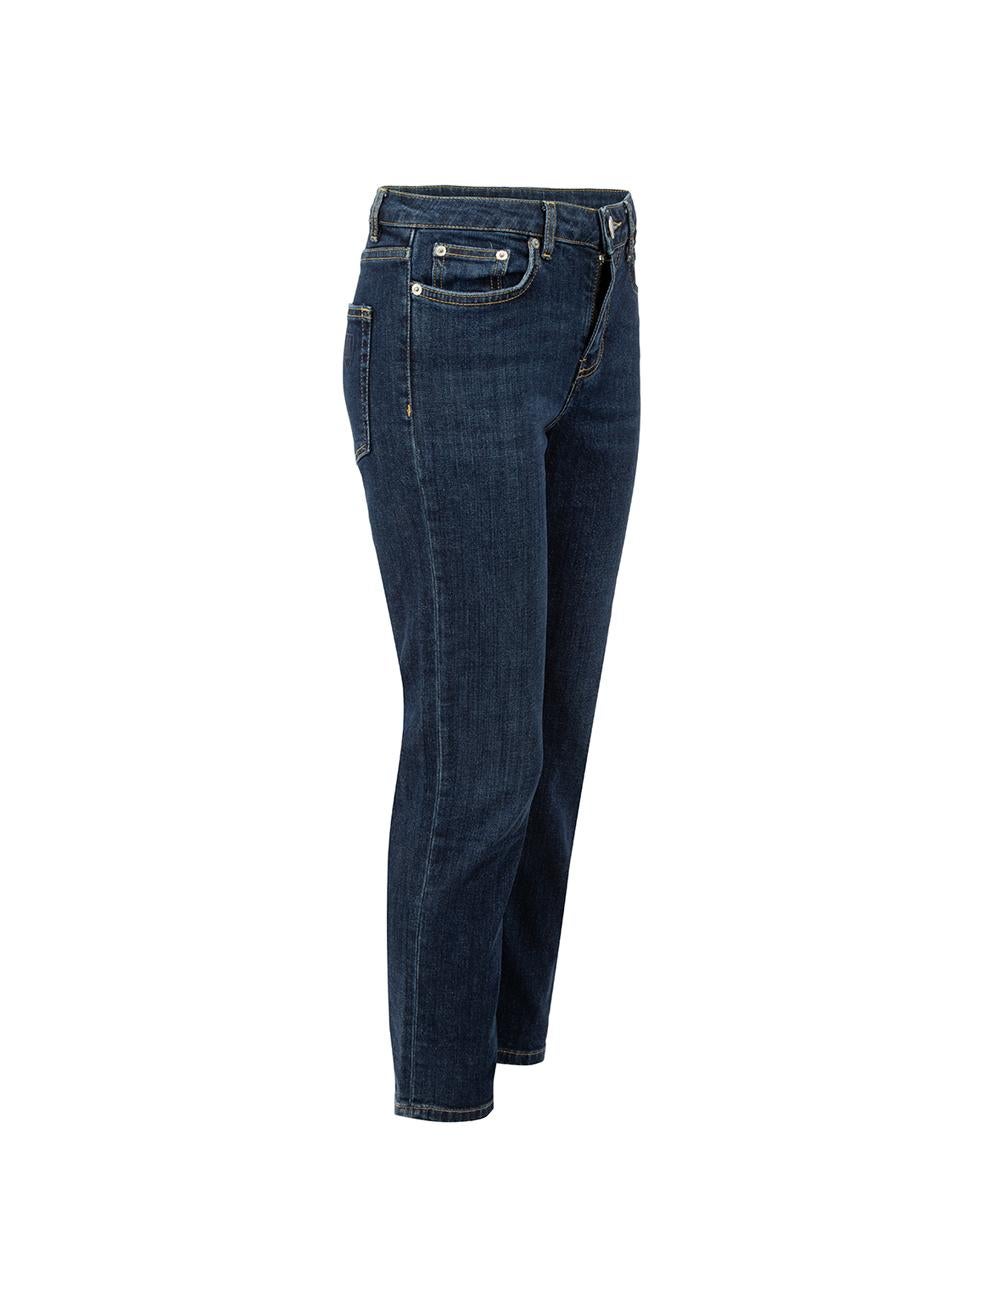 CONDITION is Very good. Minimal wear to jeans is evident. Minimal wear to the rear-right leg with loose thread on this used Maje designer resale item. 



Details


Blue

Denim

Straight leg jeans

Mid rise

Cropped ankle length

Front zip closure